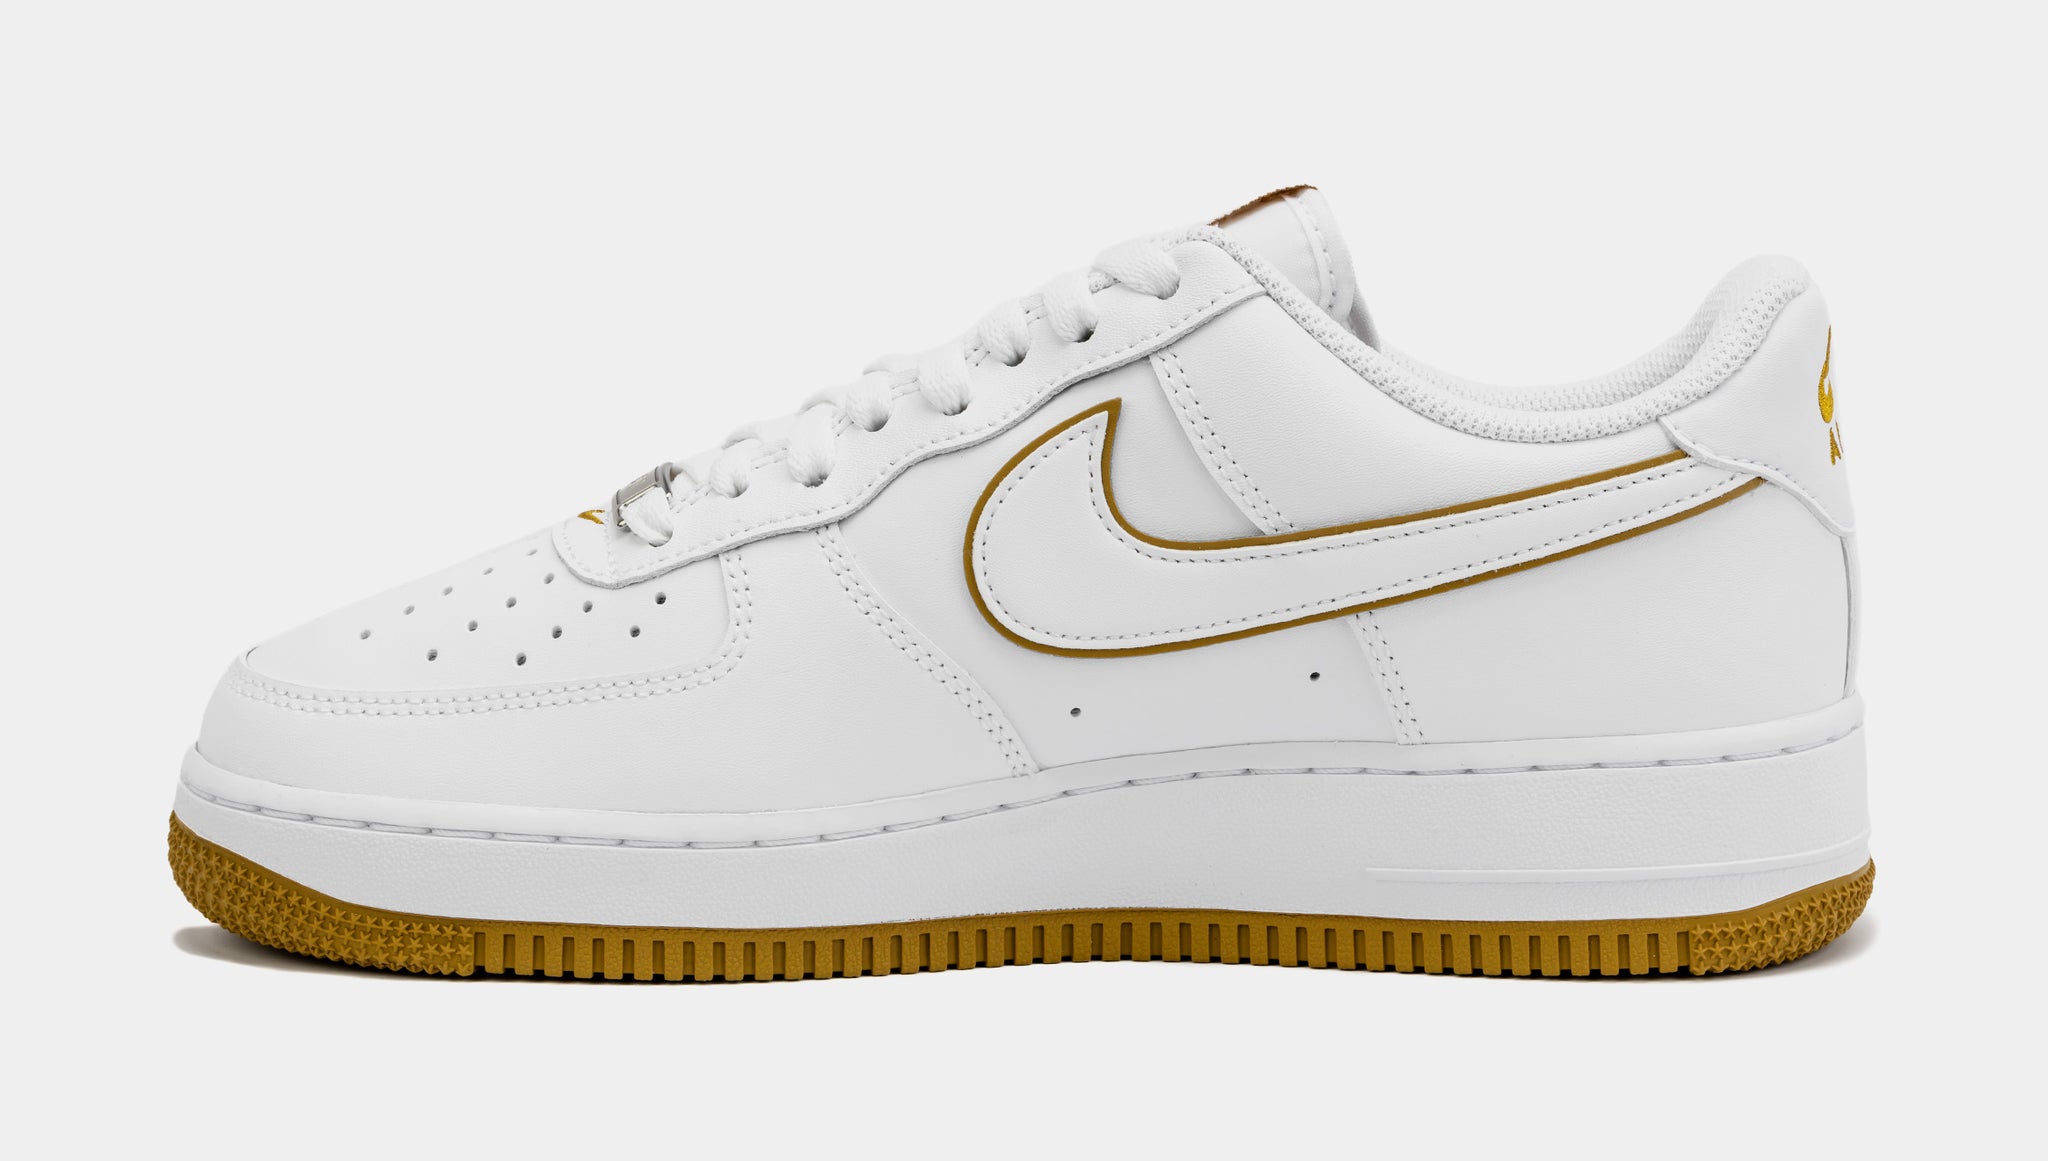 Nike Air Force 1 '07 Low Mens Lifestyle Shoes White Bronzine